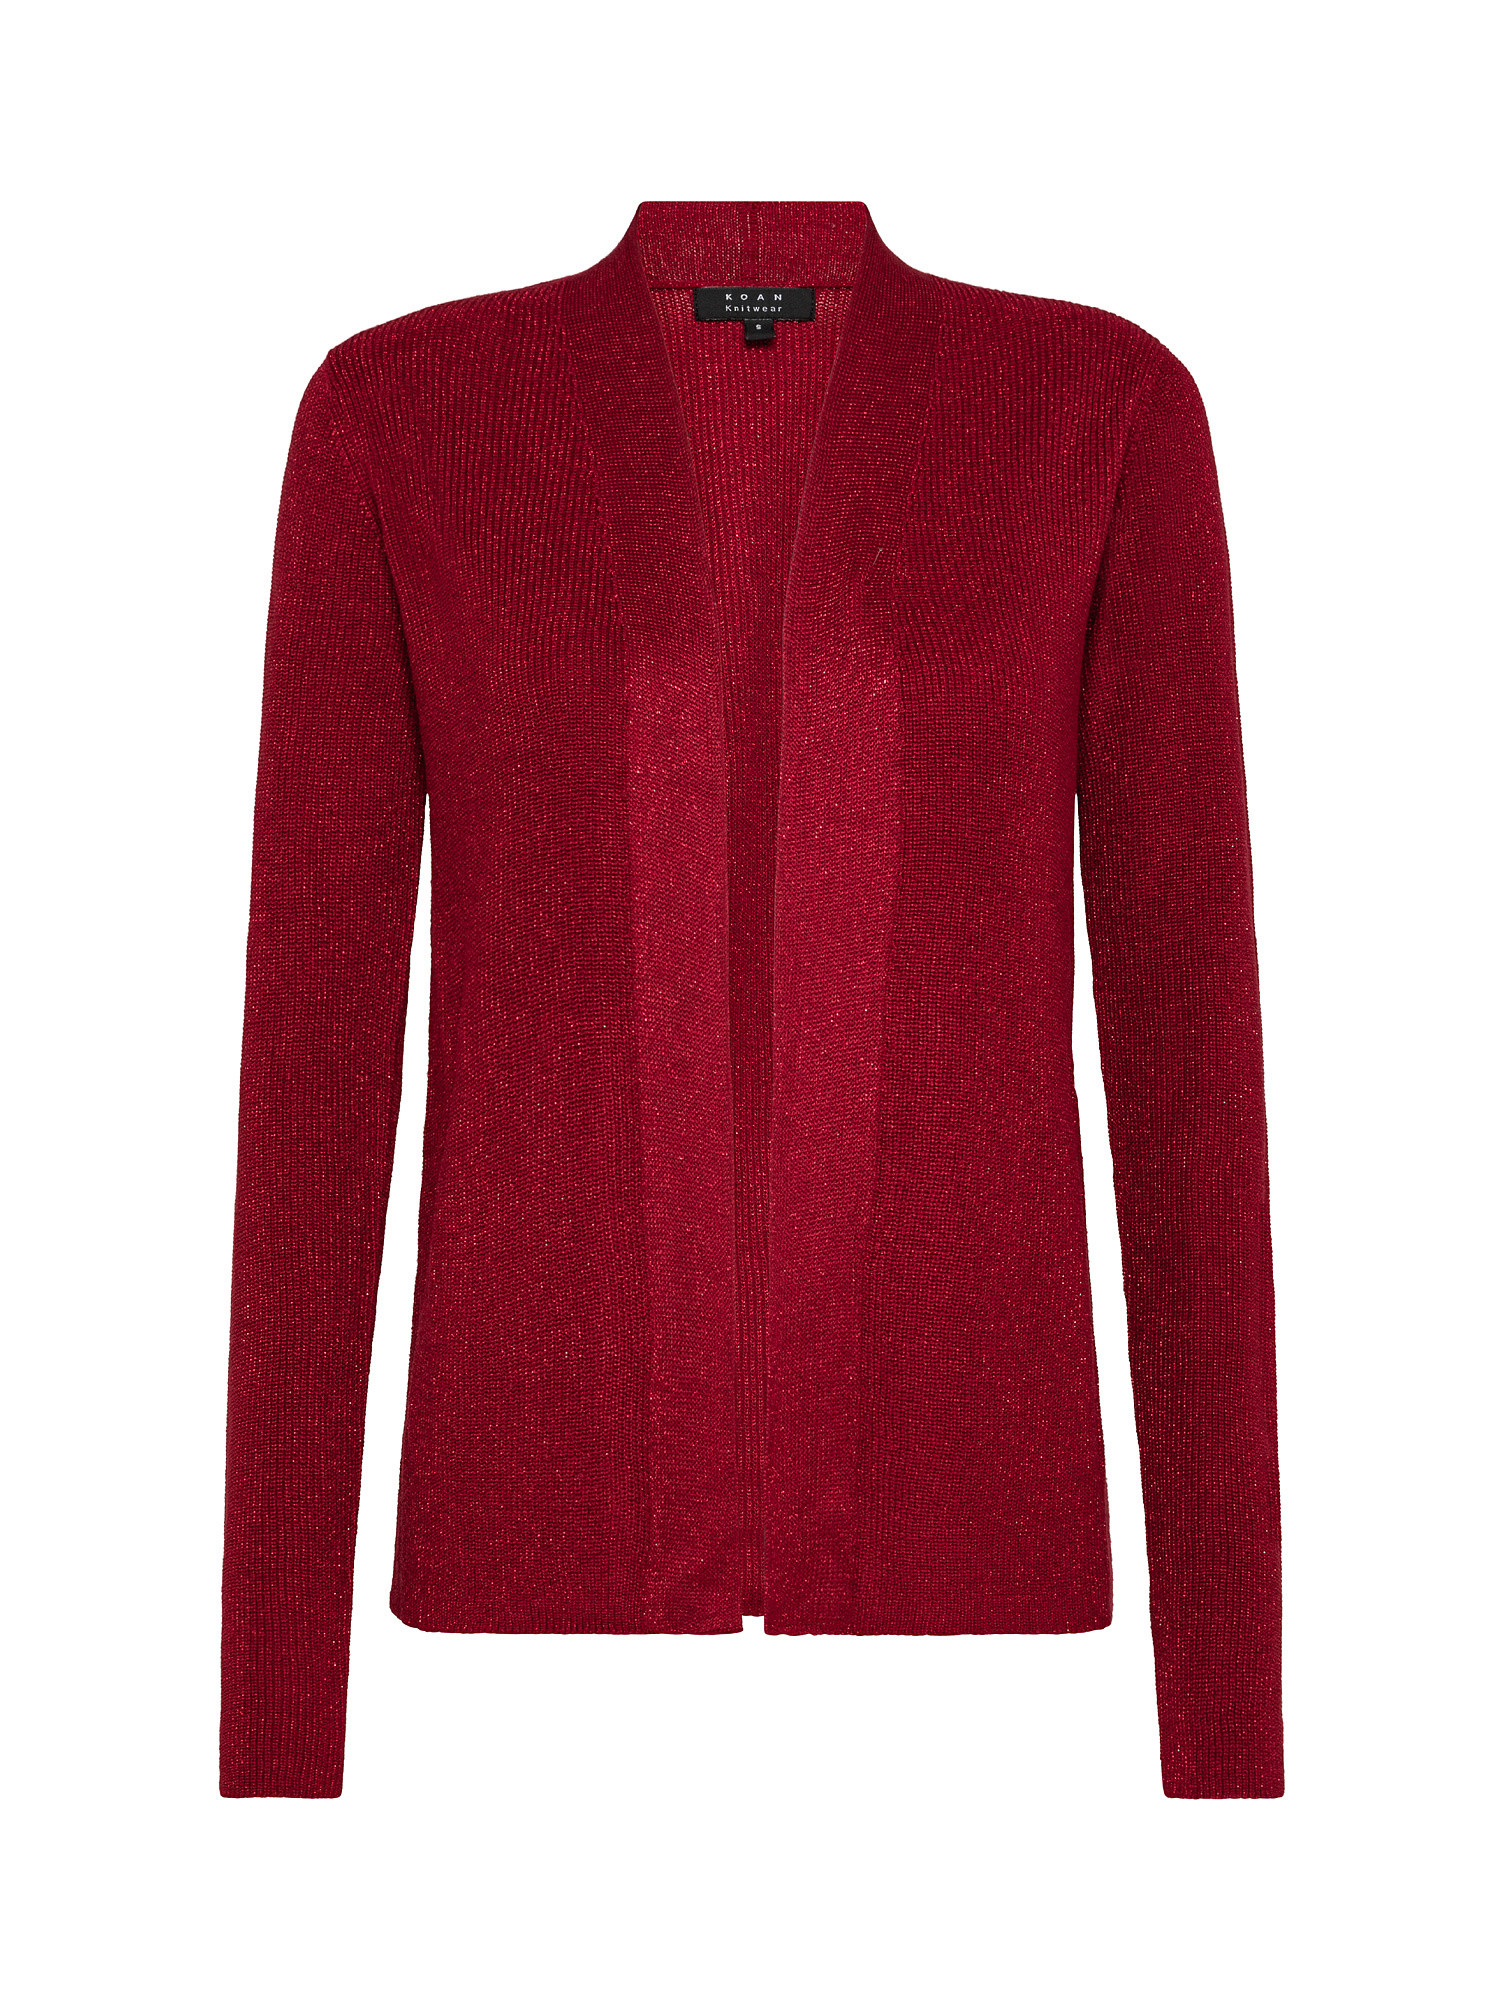 Cardigan in maglia, Rosso, large image number 0